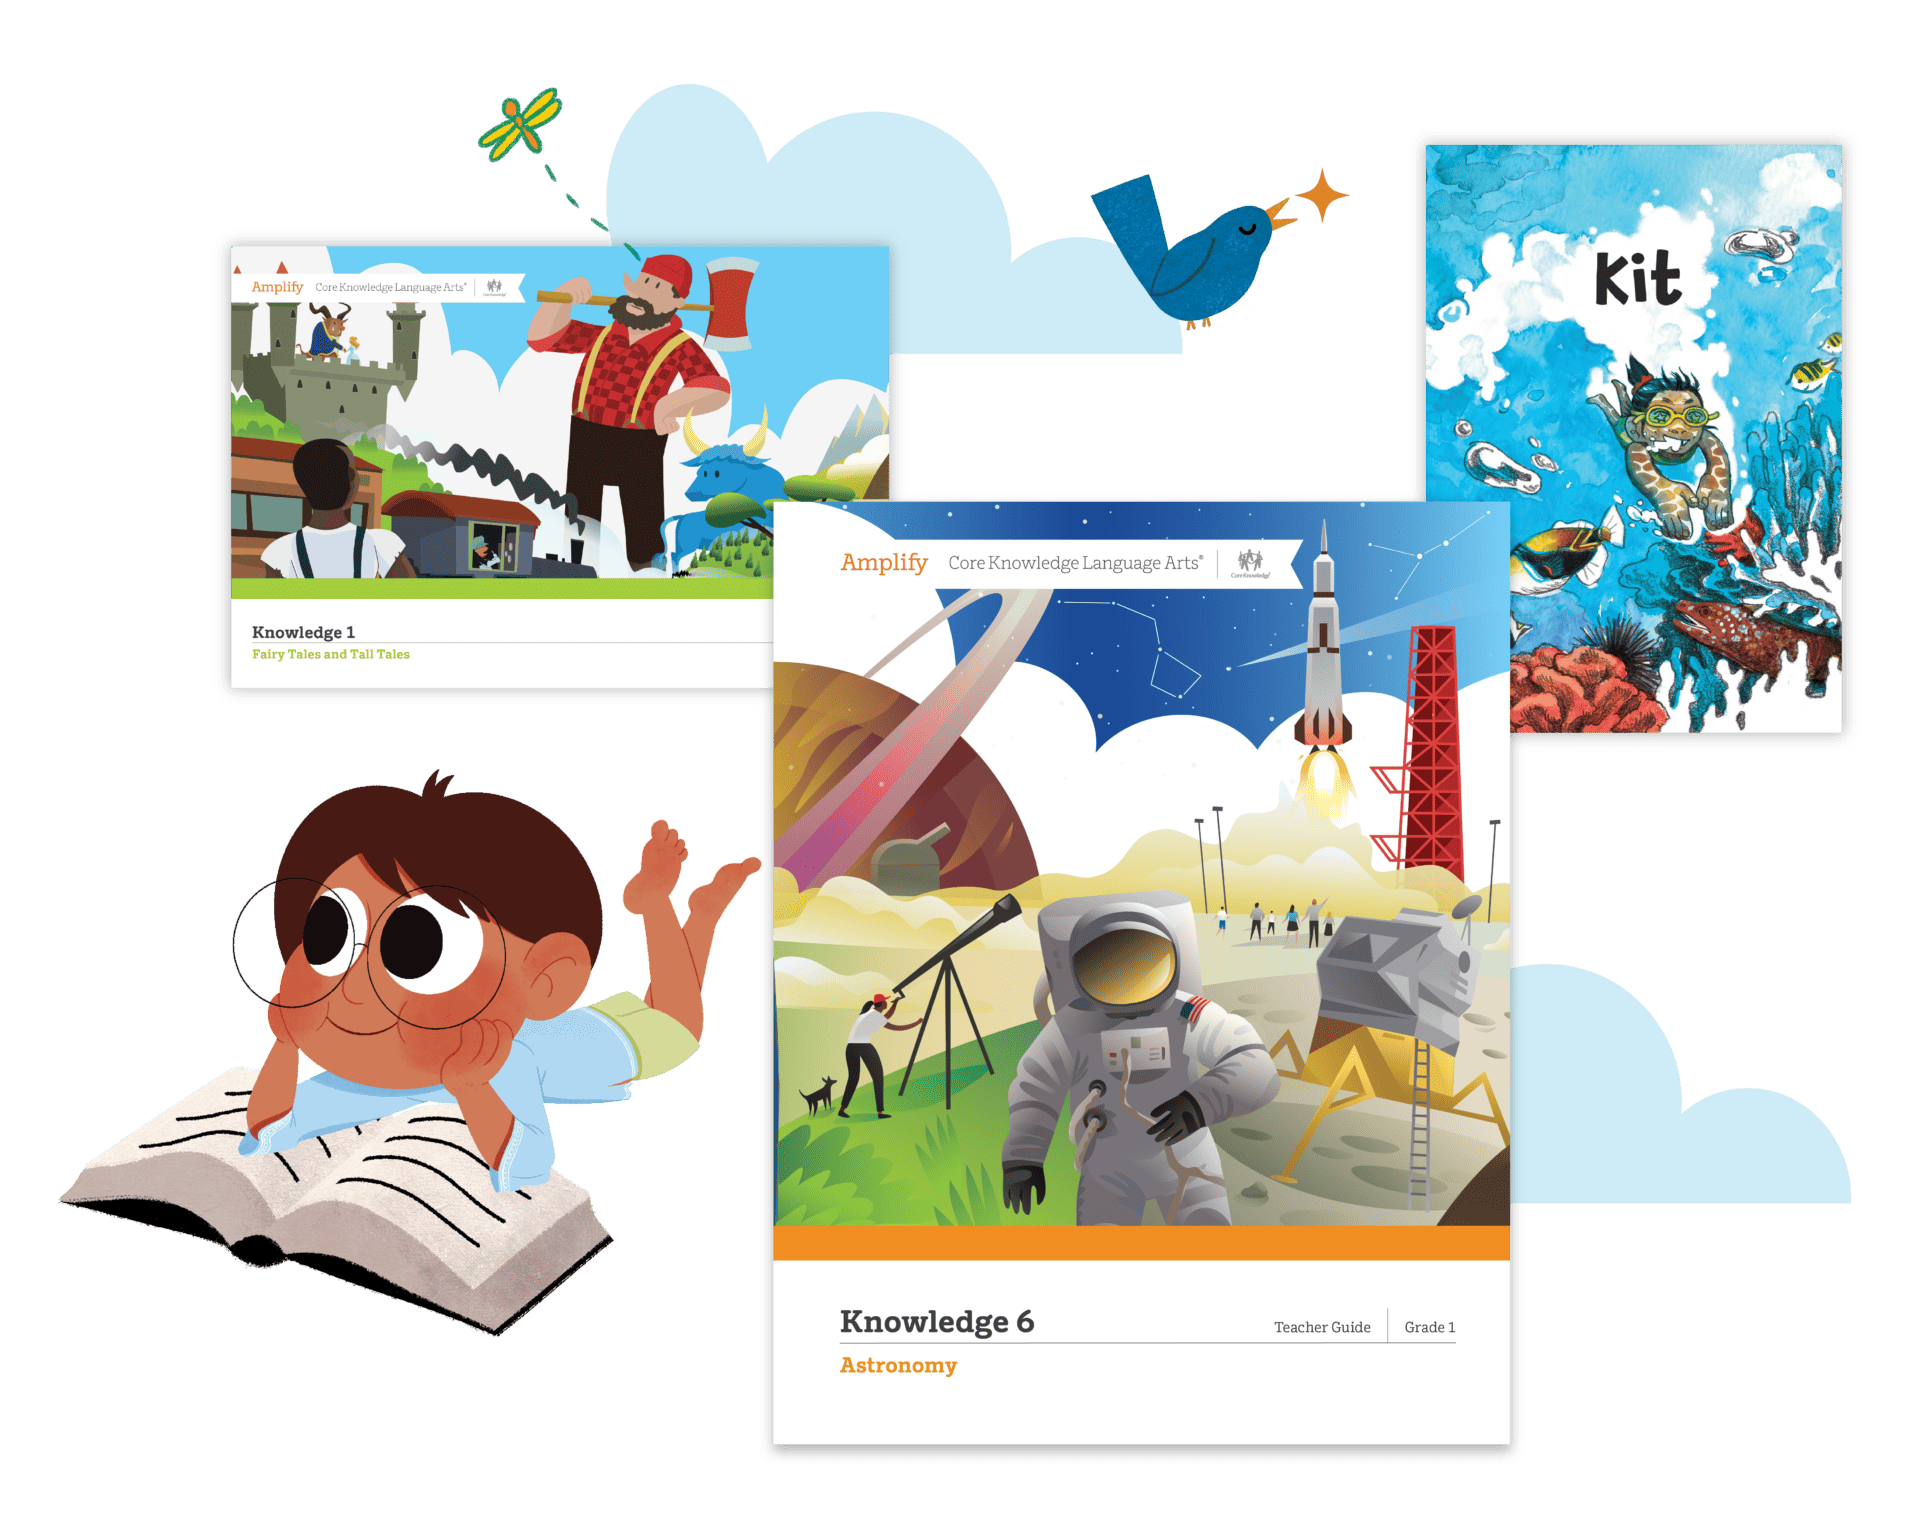 Collage of educational images including a child engaged in a K–5 literacy program, scenes of space exploration, historical themes, animals, and sports activities.